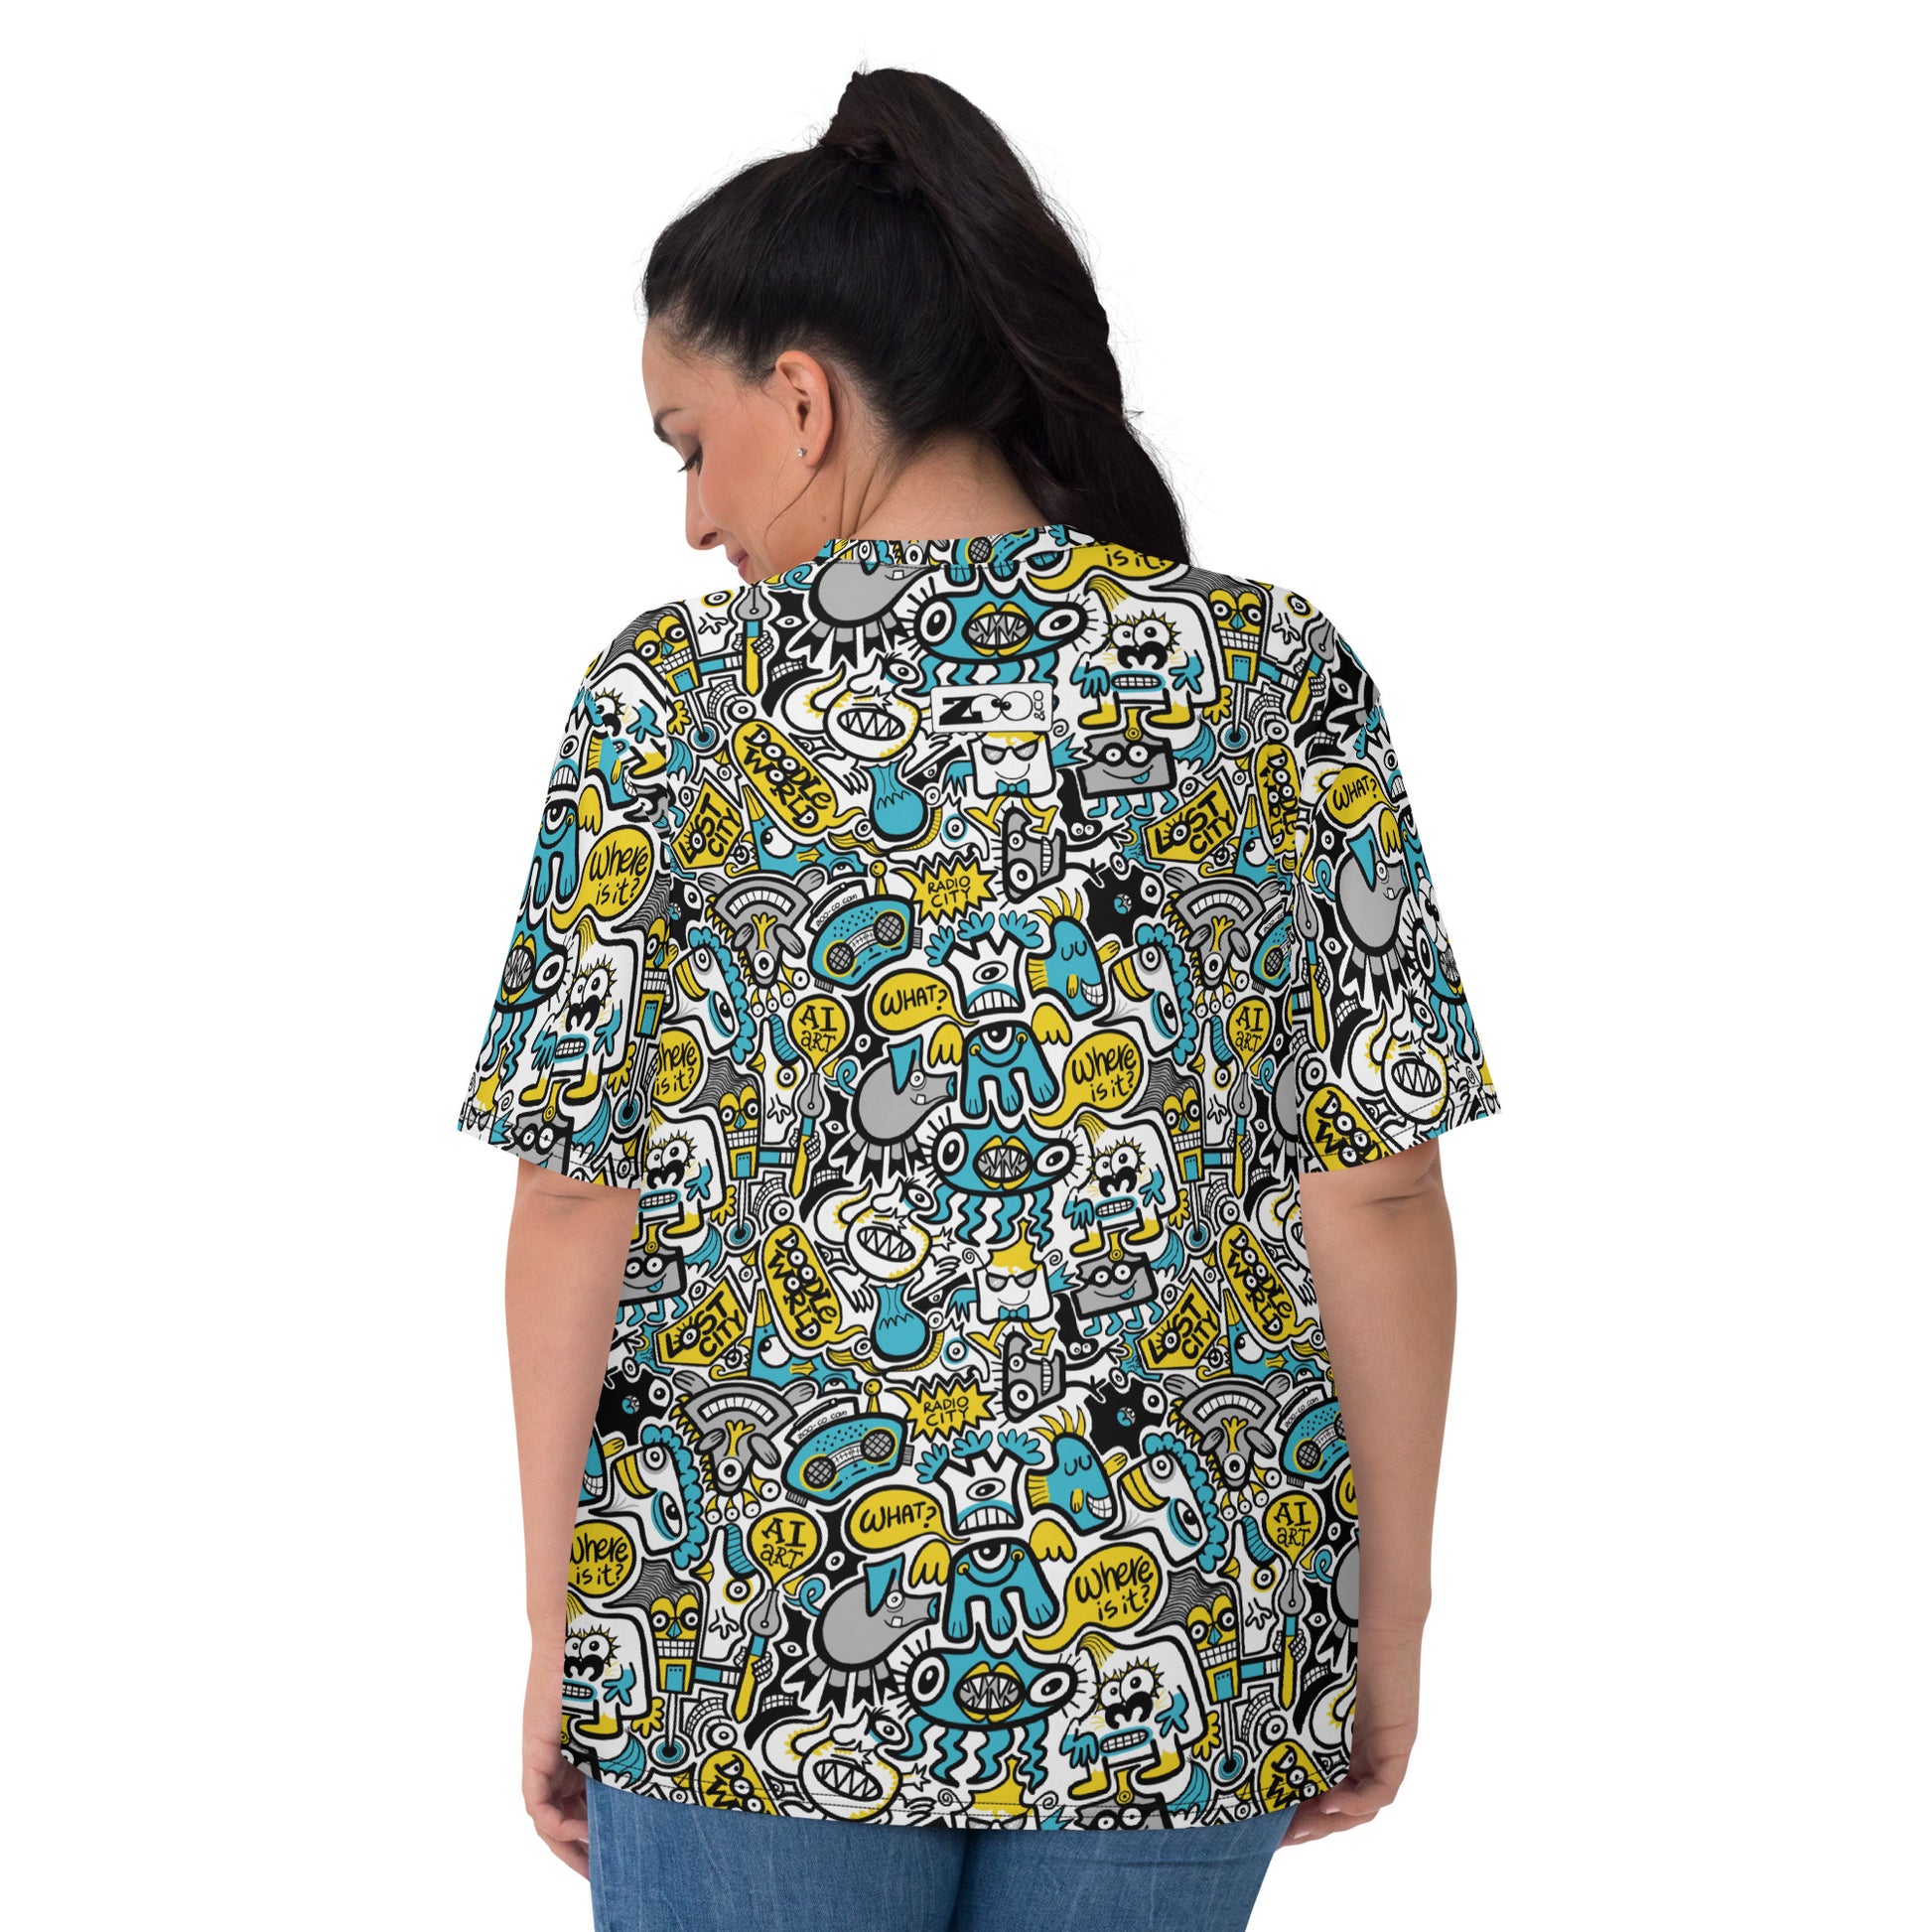 Discover a whole Doodle world in Lost city All-over print Women's T-shirt. Back view